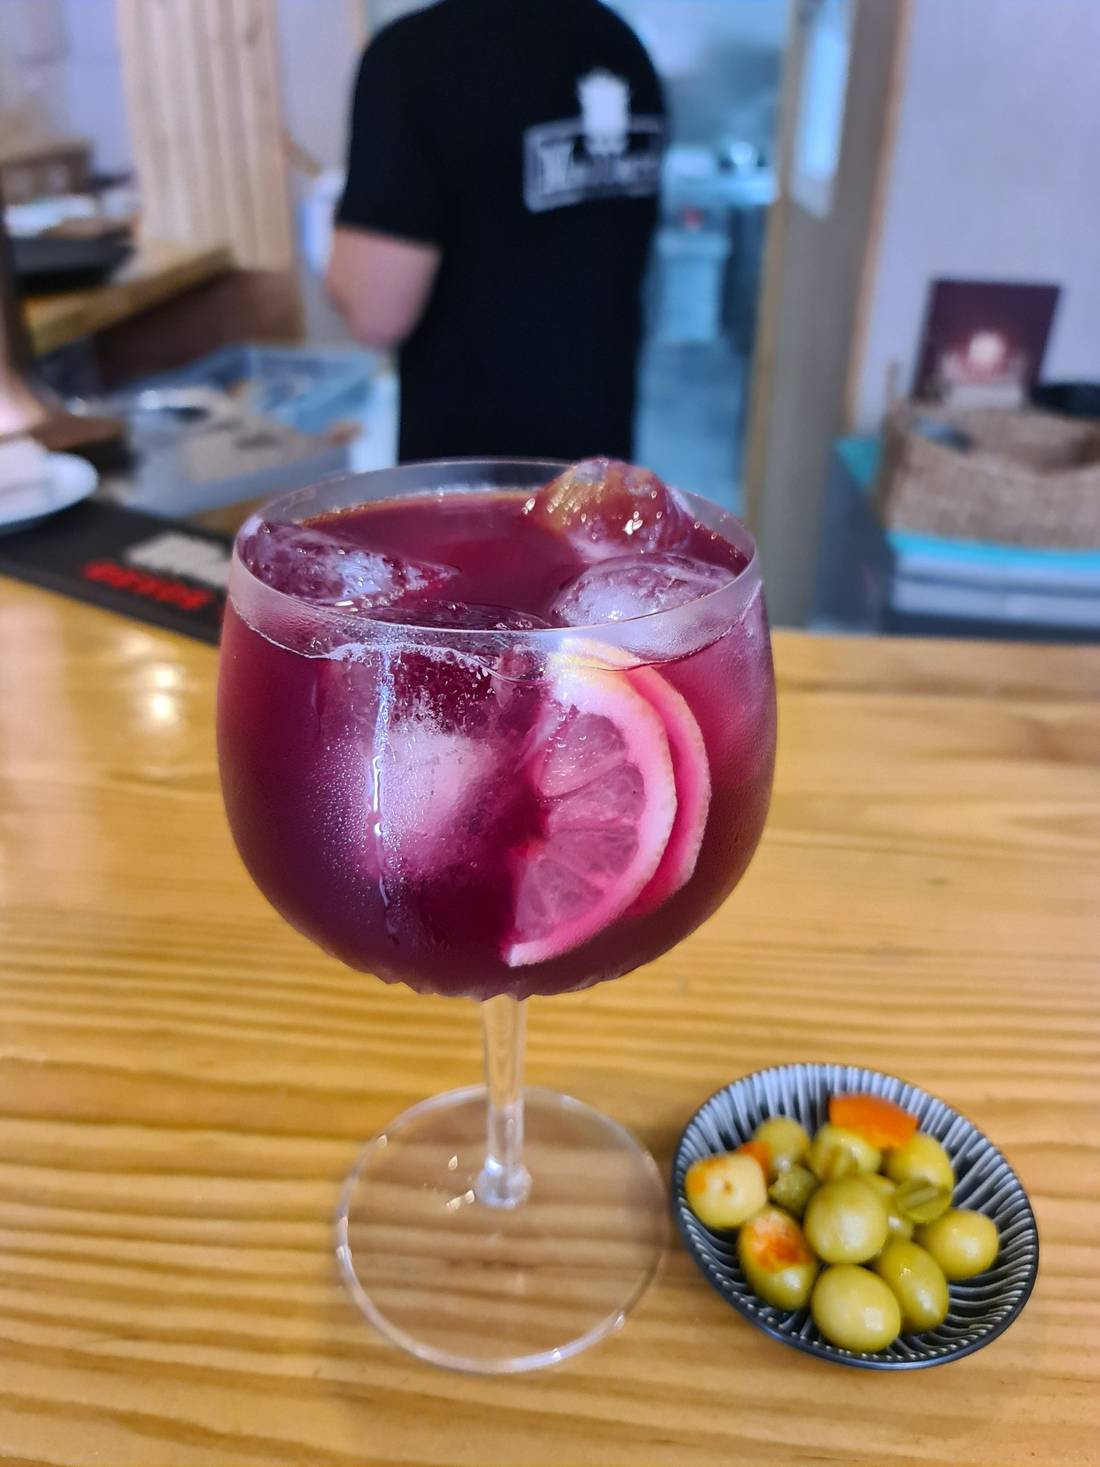 ”Tinto de verano” glass (red wine with soda, lemon slices and ice cubes) + olives (€4.50).